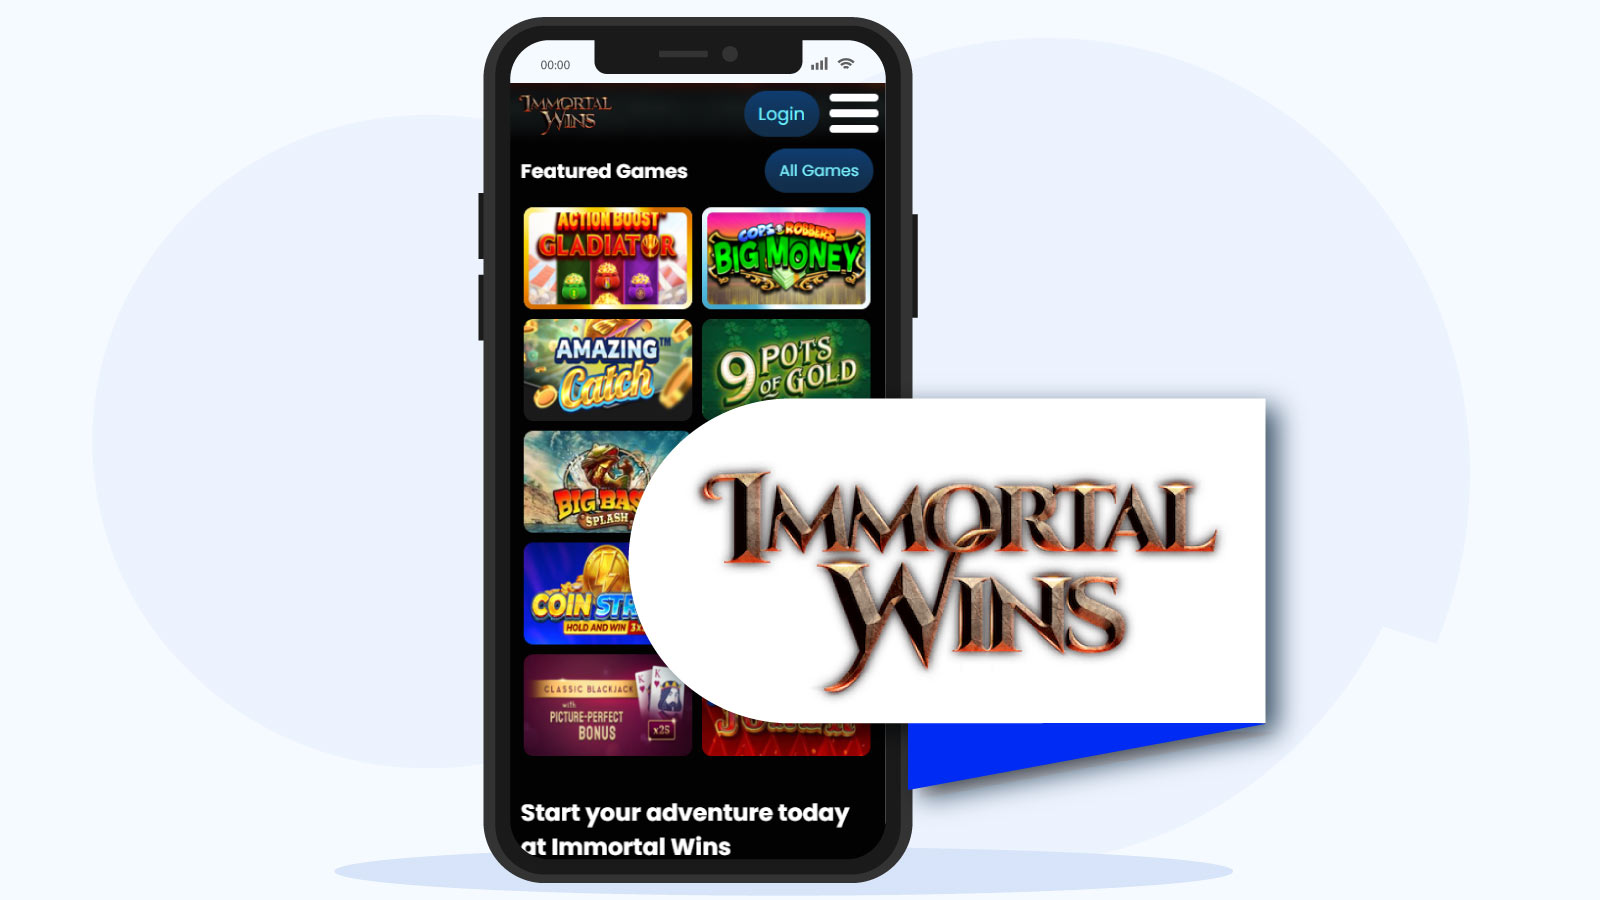 Immortal Wins – Runner- up casino that accepts Pay By Phone